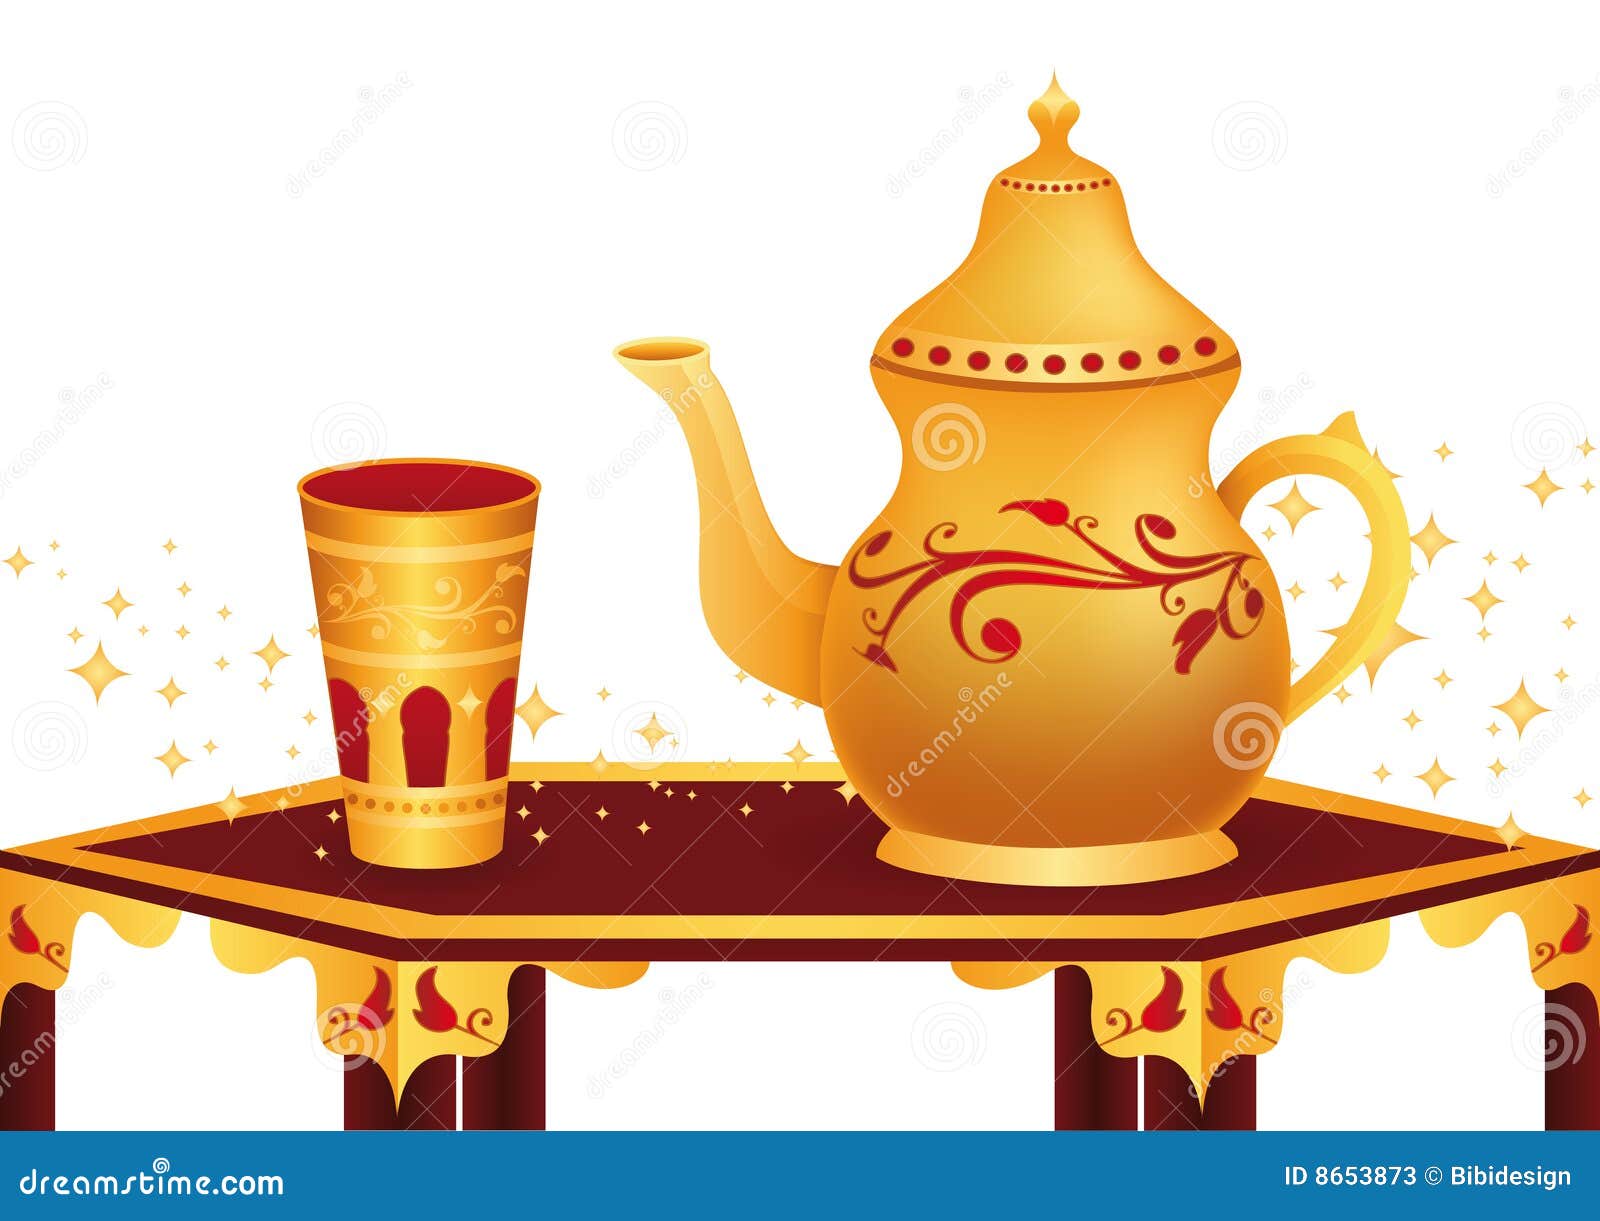 and hospitality english download tourism for Break  8653873 Tea Stock  Image: Photos